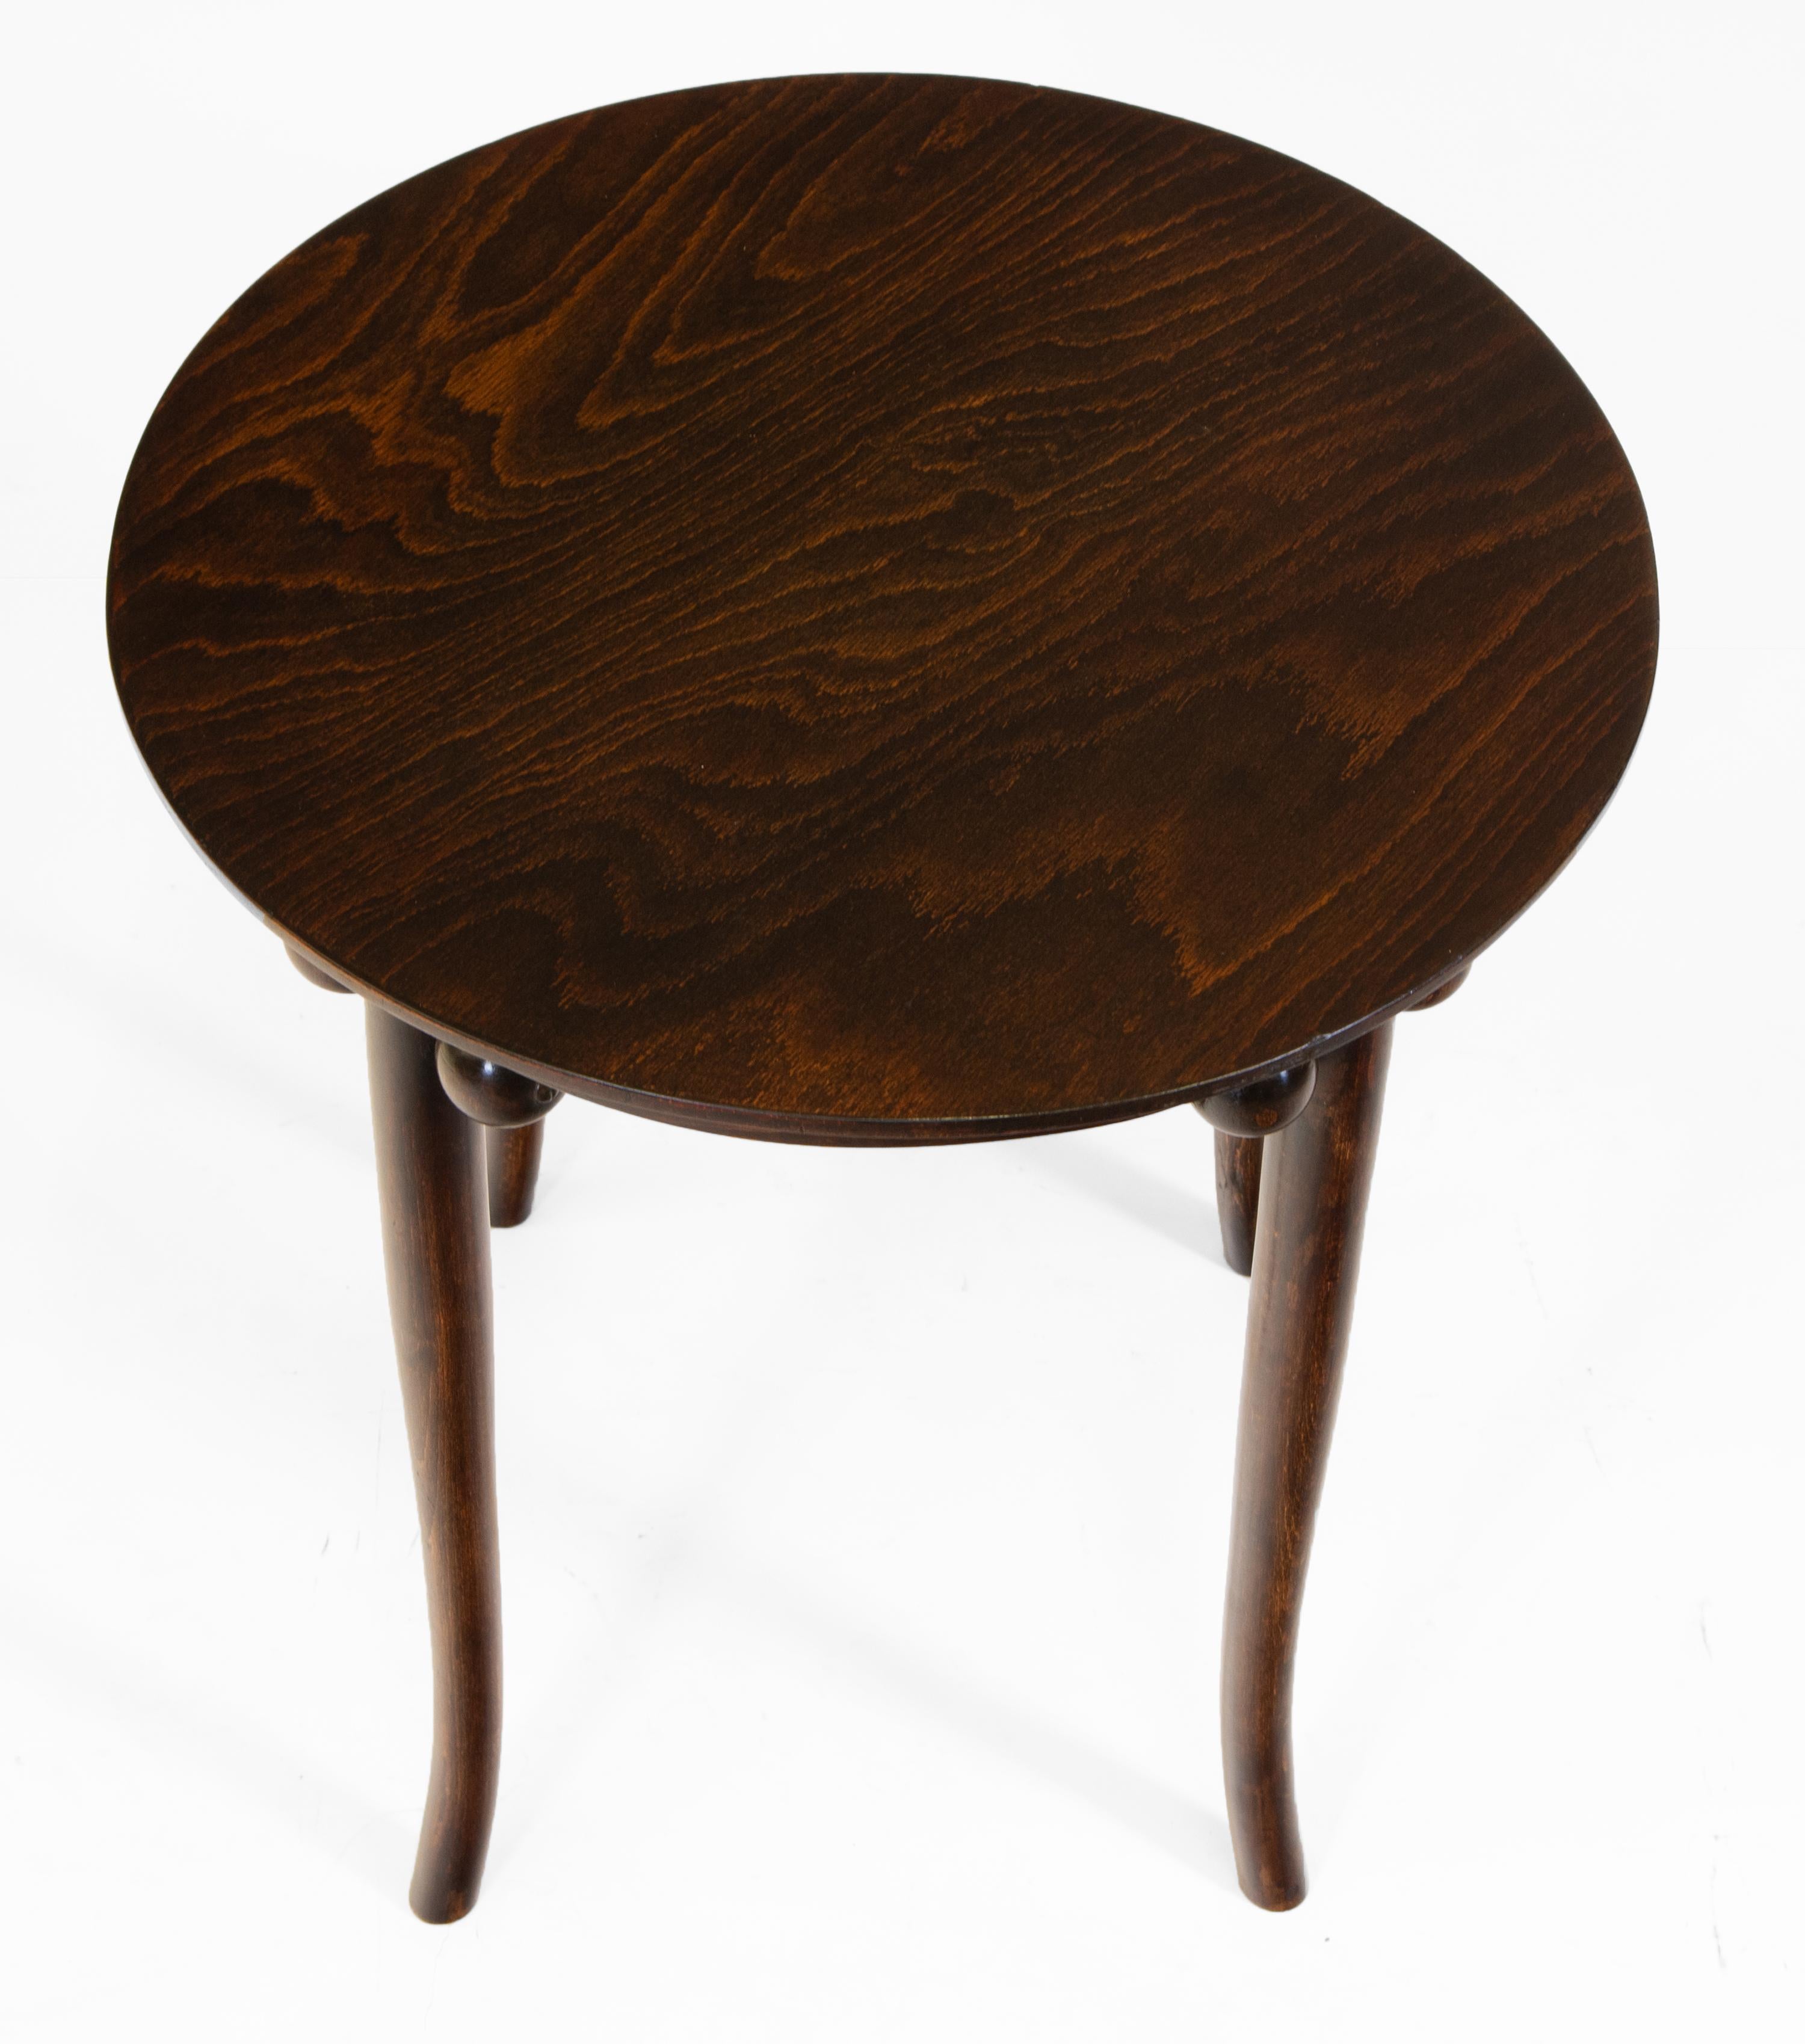 20th Century  Secessionist Bentwood Side Table Circa 1900